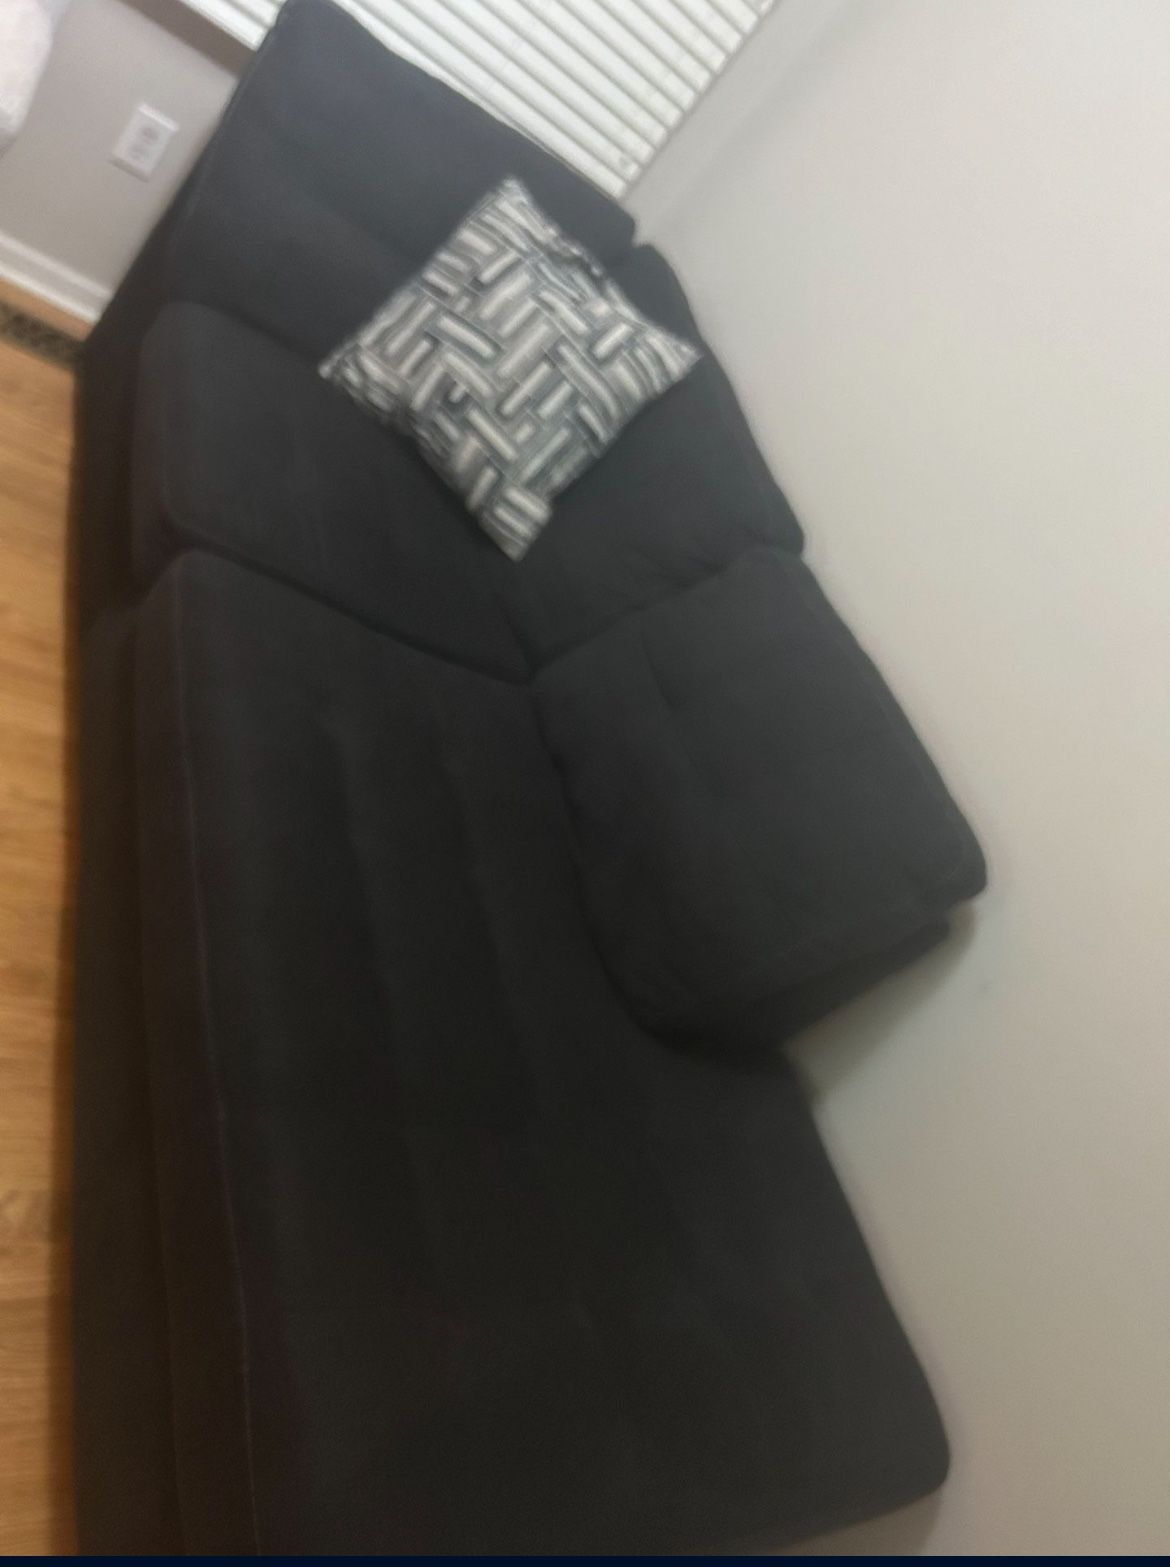 Comfy Chaise Sofa- Pick Up Today!